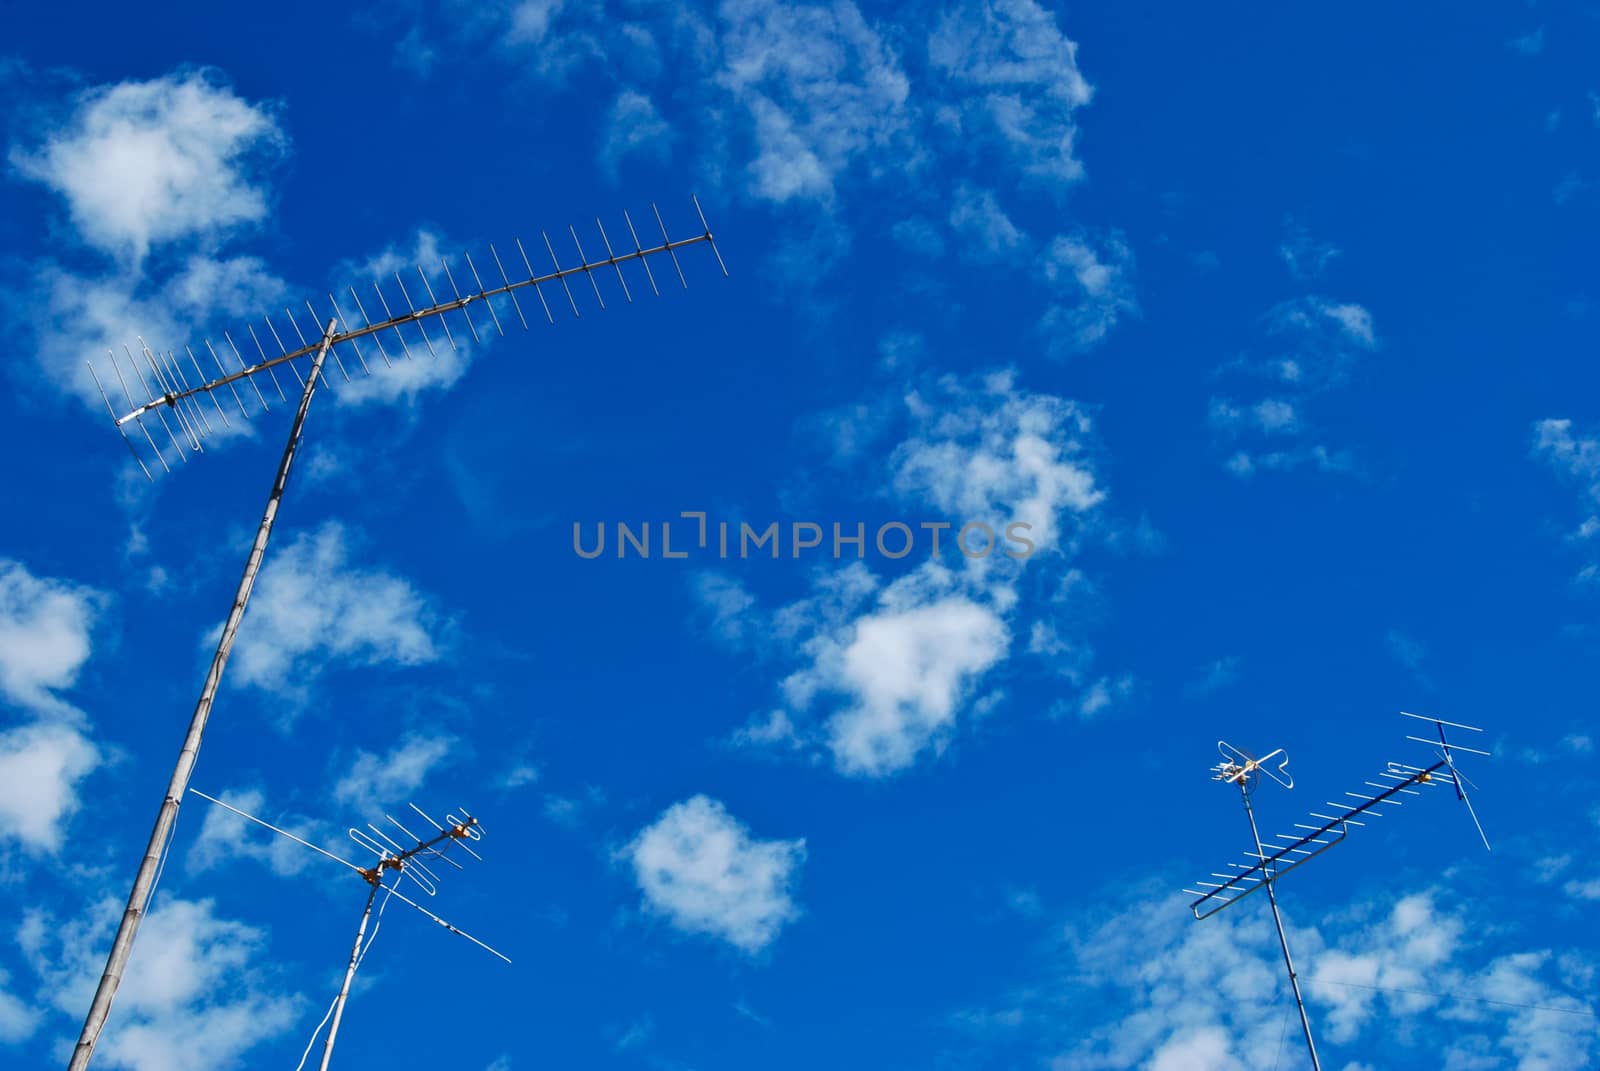 the three antenna are standing over sky by yotananchankheaw